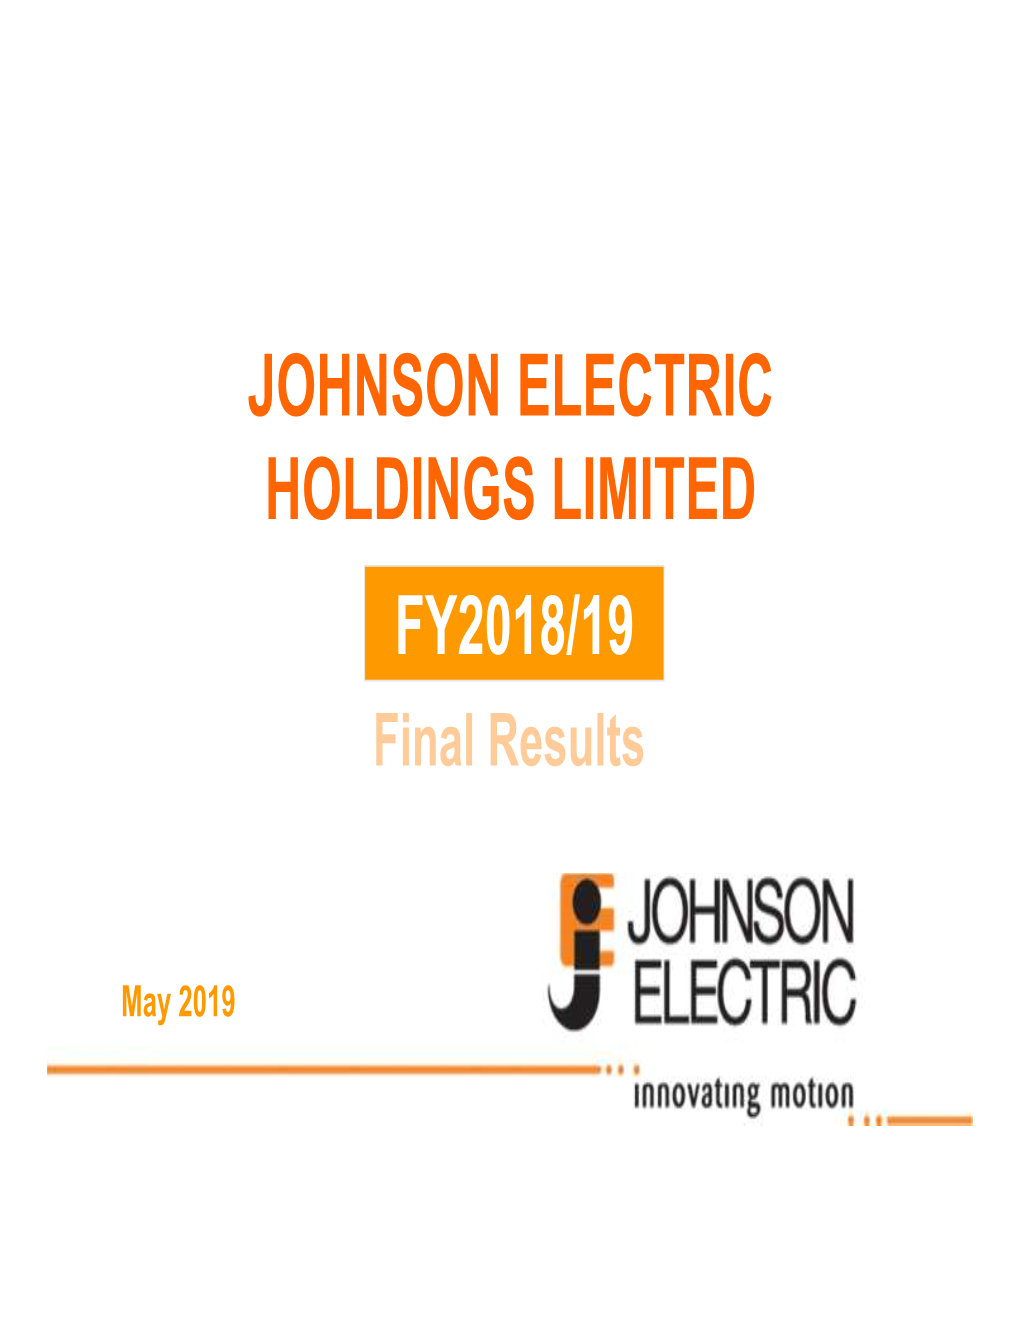 JOHNSON ELECTRIC HOLDINGS LIMITED FY2018/19 Final Results